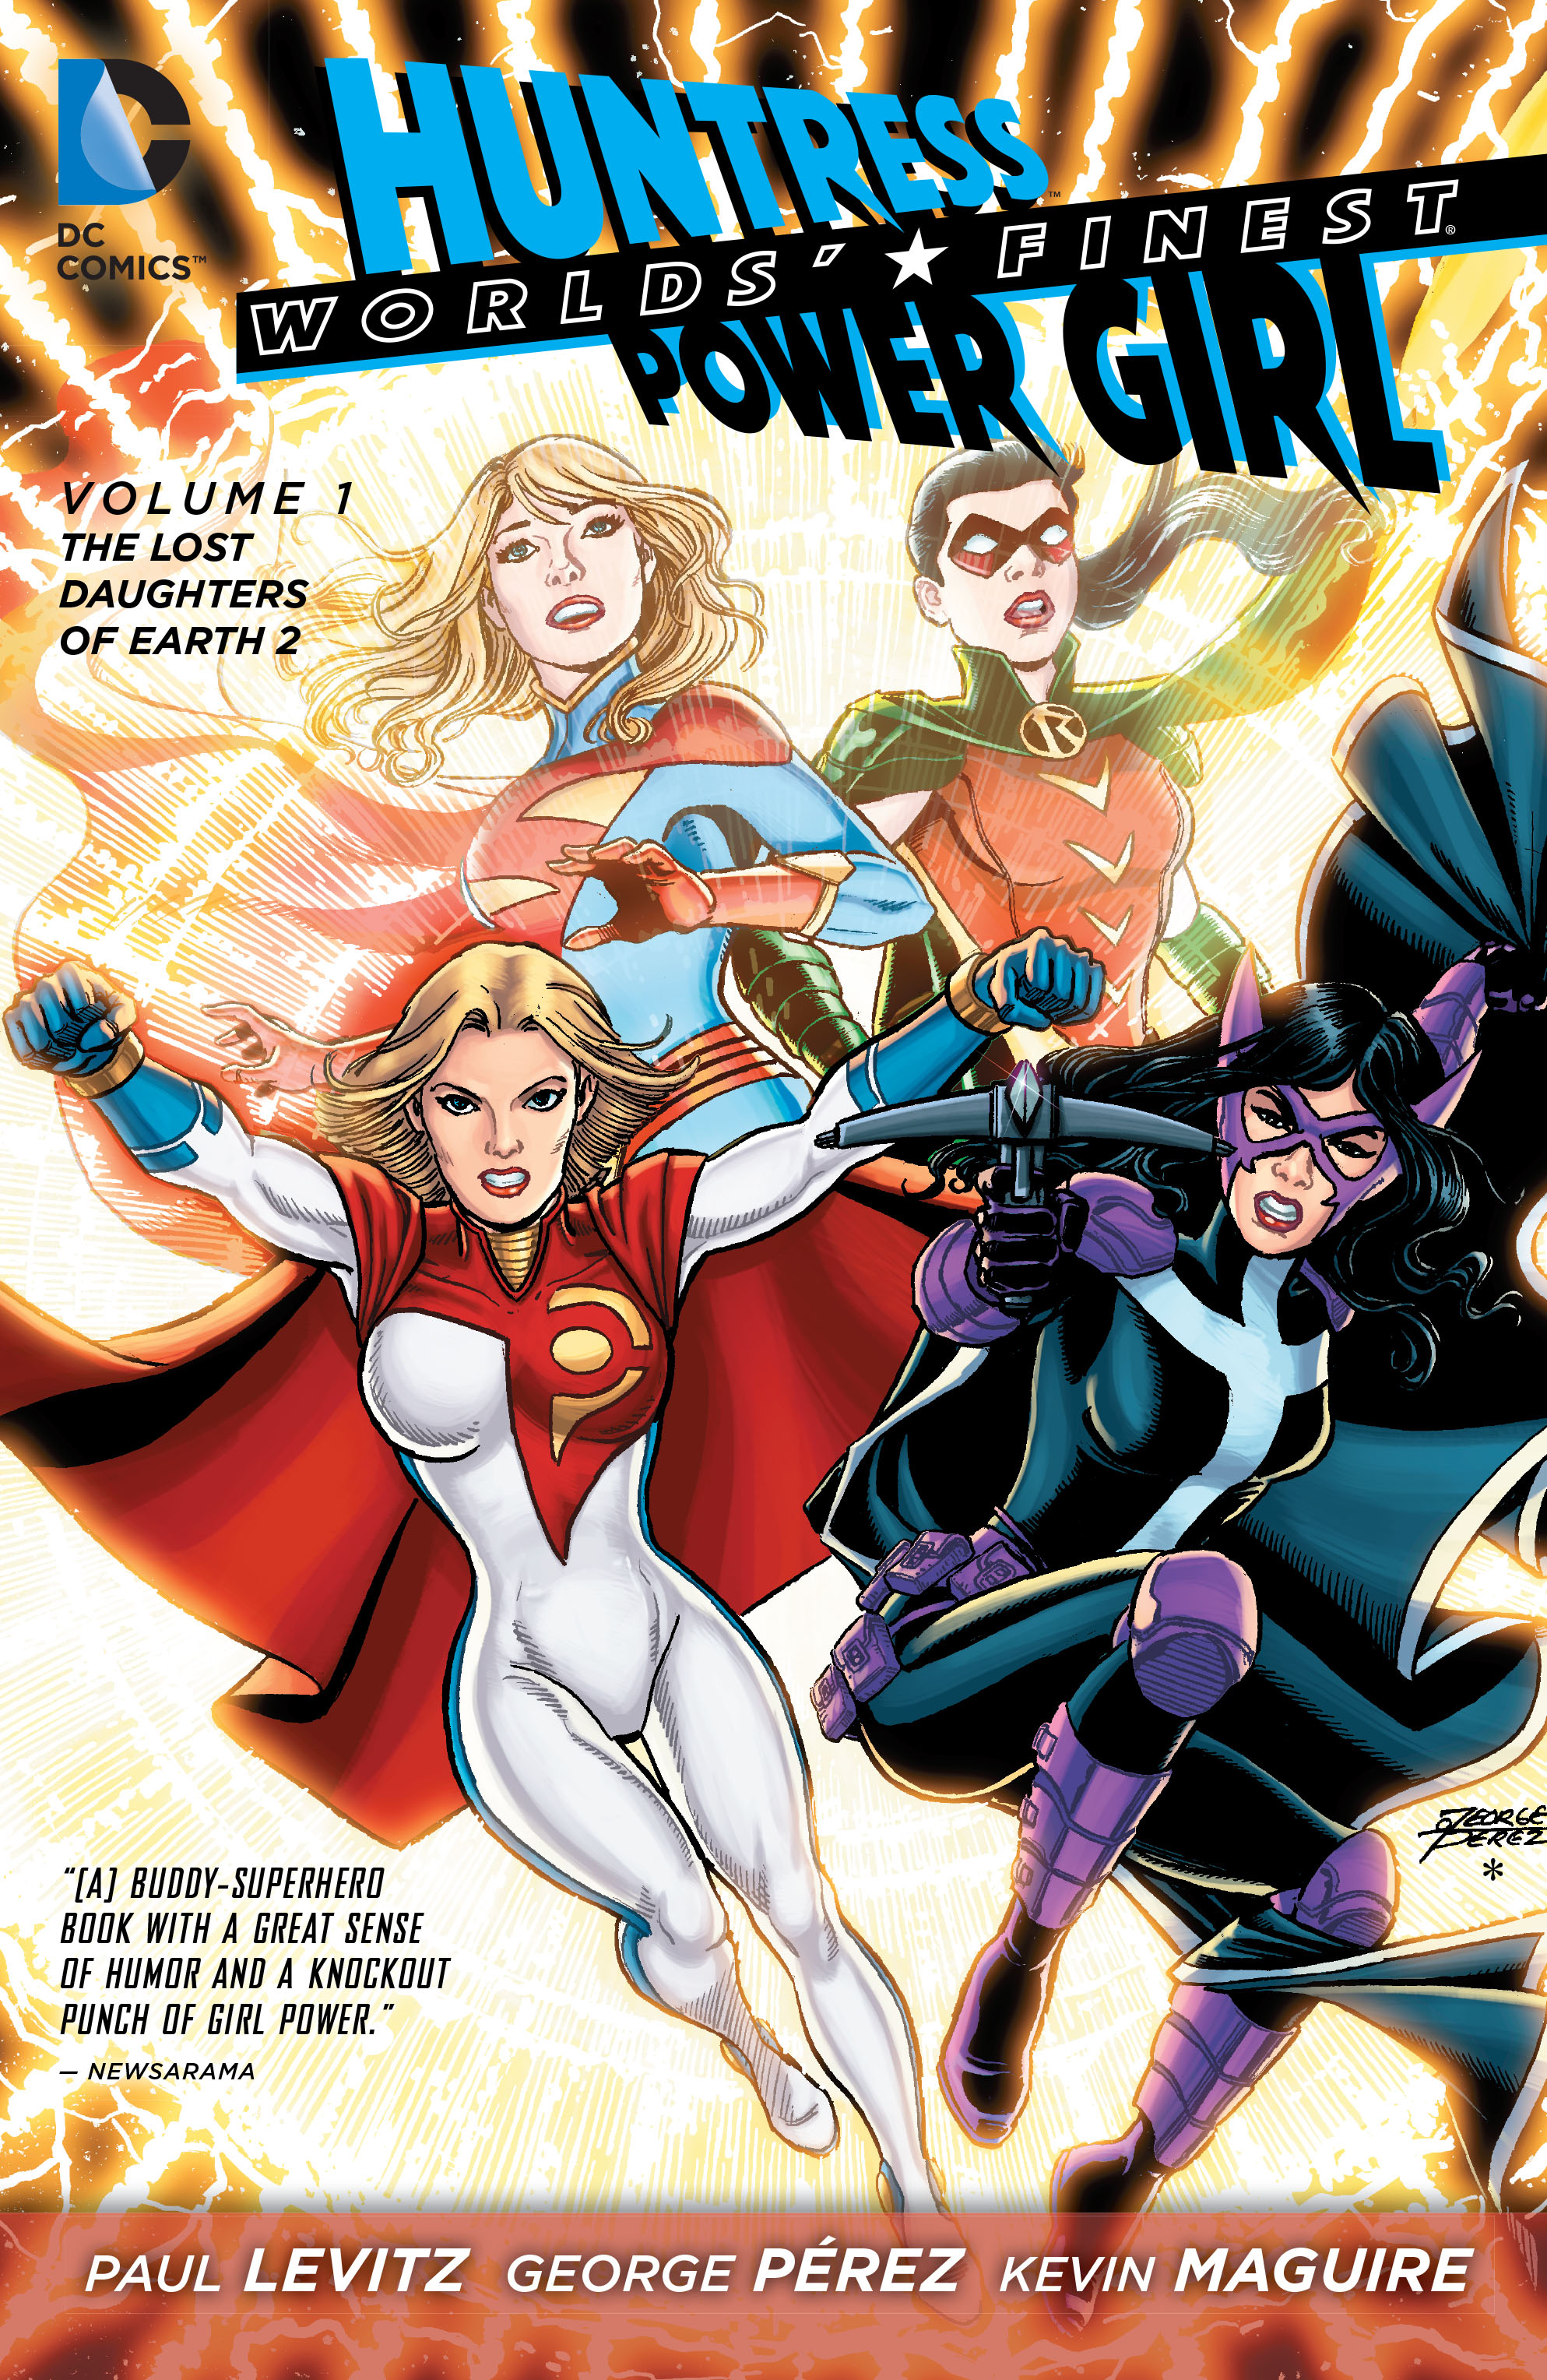 Worlds' Finest, Vol. 1: The Lost Daughters of Earth 2 (The New 52) Paul Levitz, George Perez and Kevin McGuire